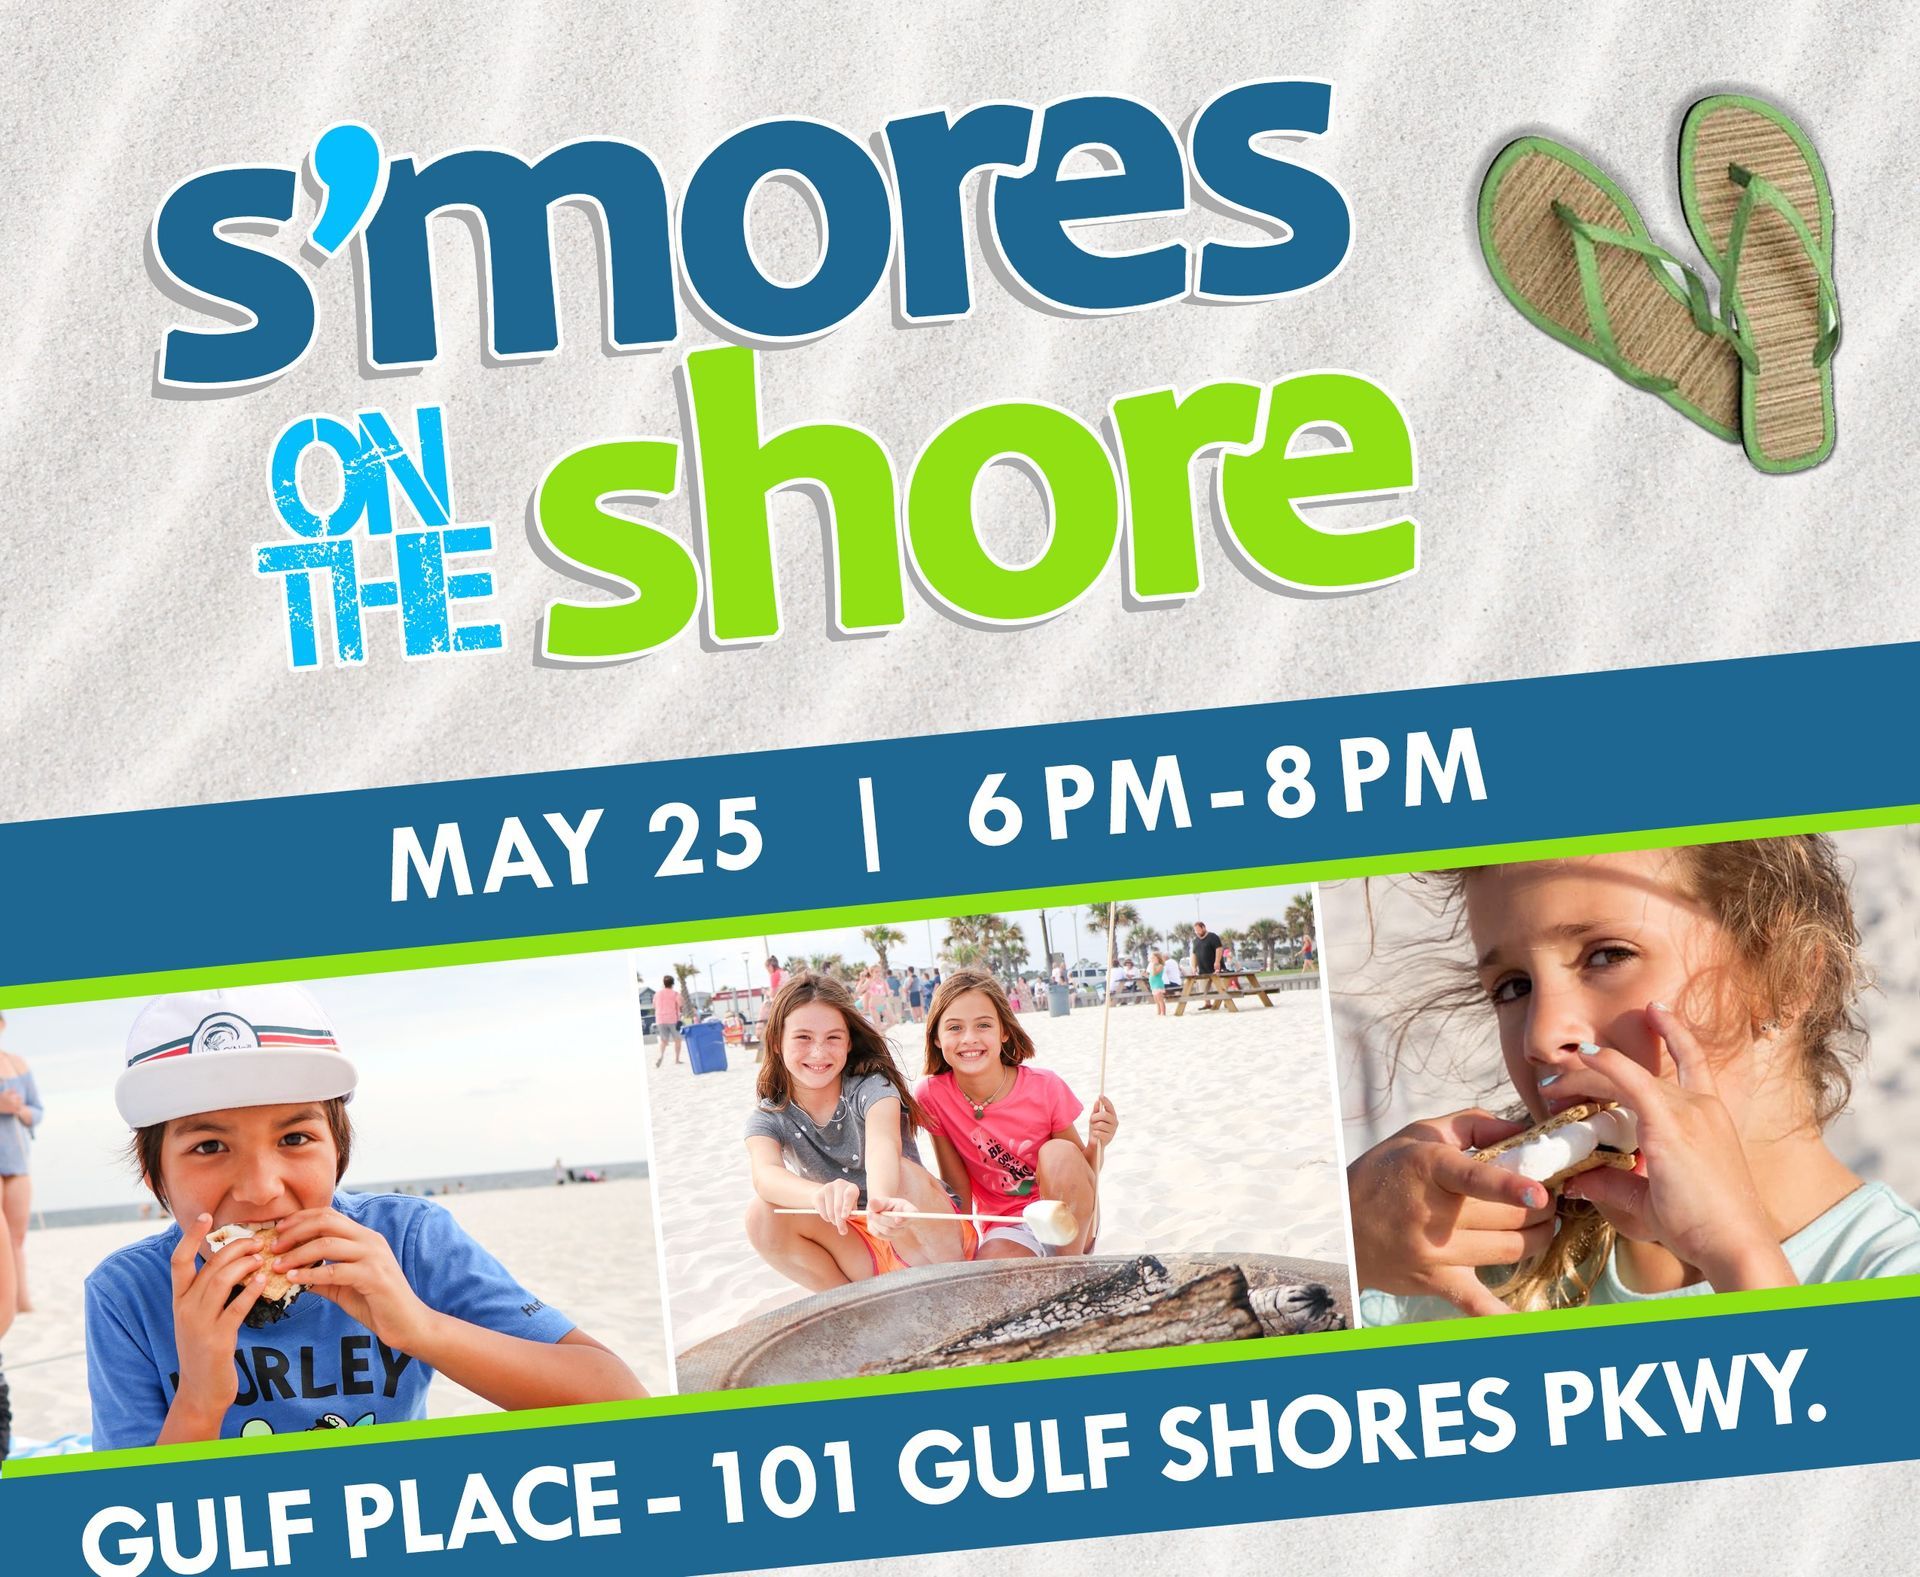 Gulf Shores, Alabama, will have another S'mores on the Shore event on May 25.